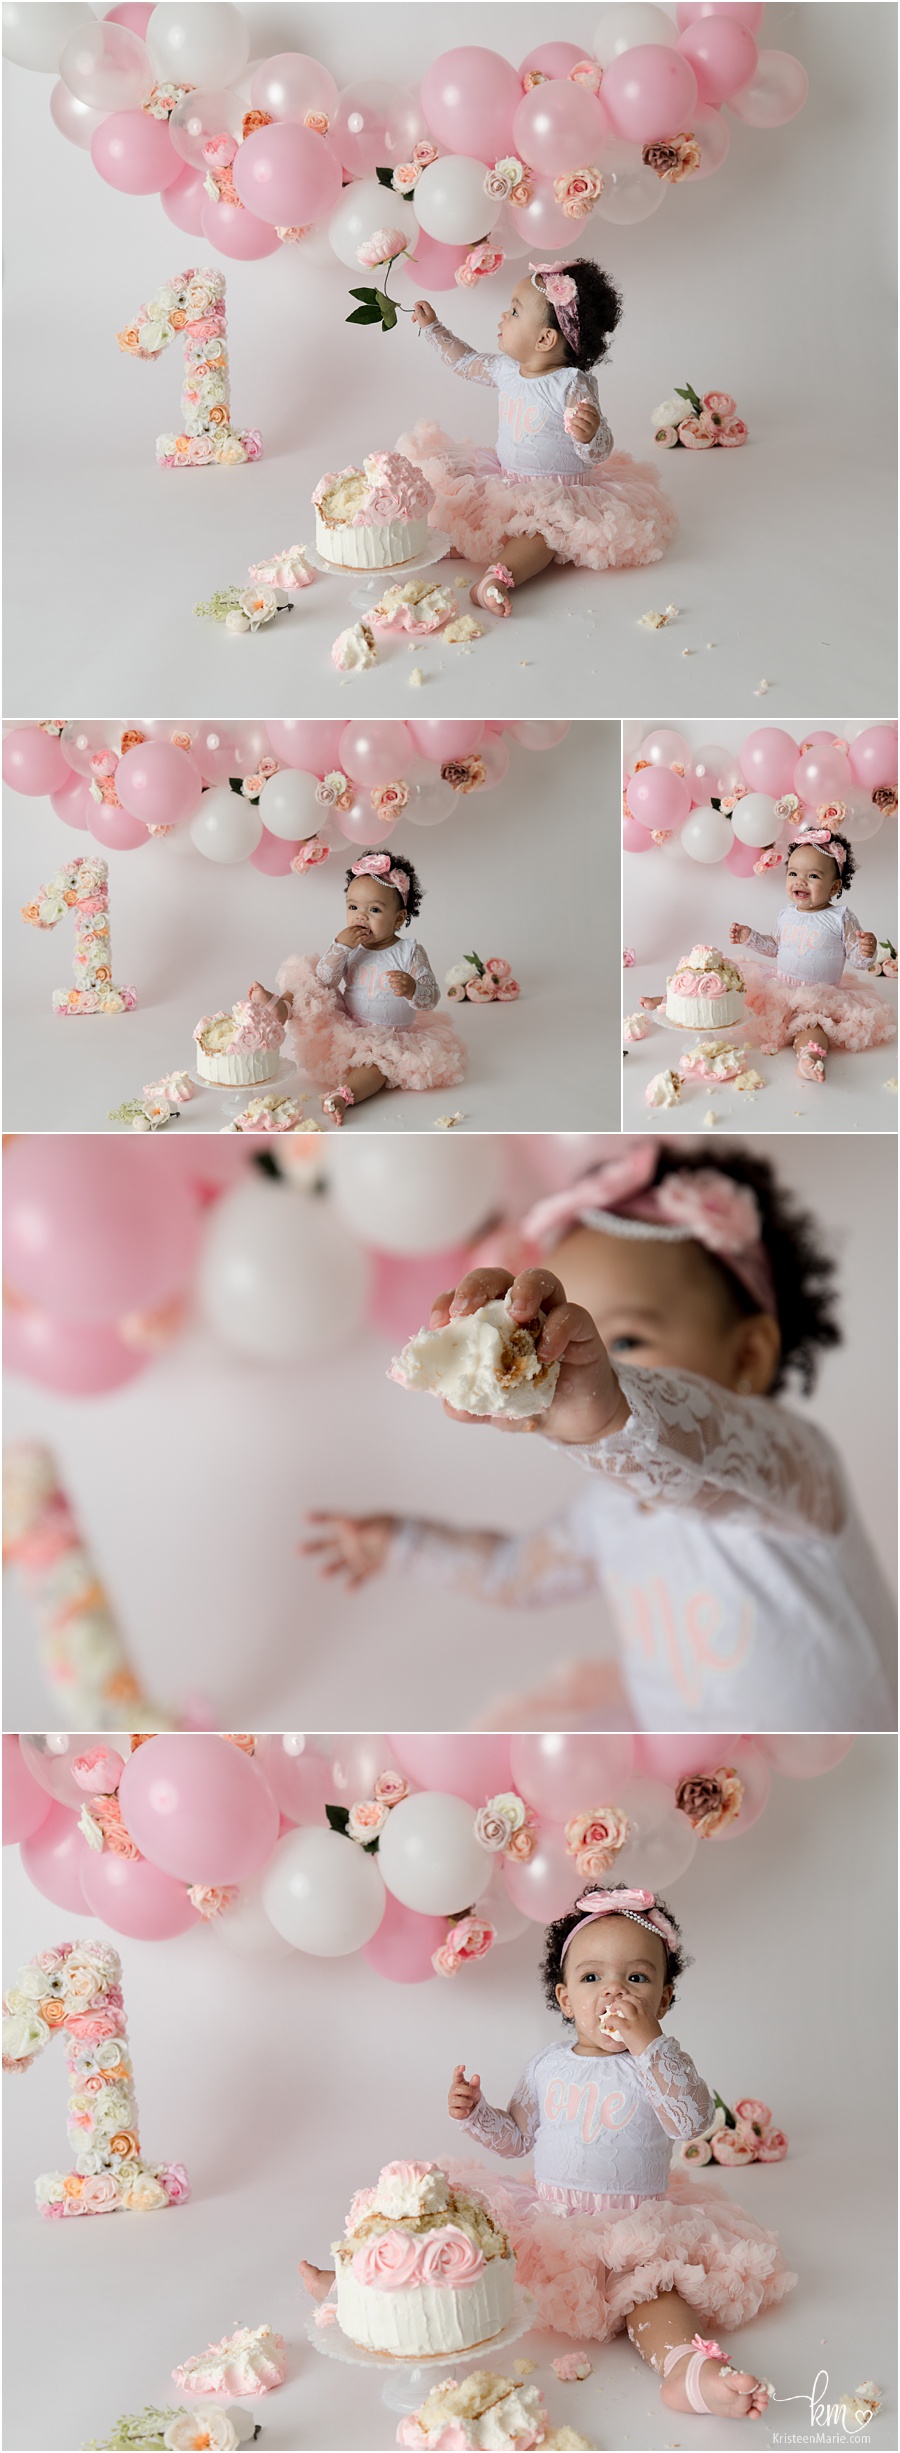 Cake Smash session with pink balloon arch including flowers